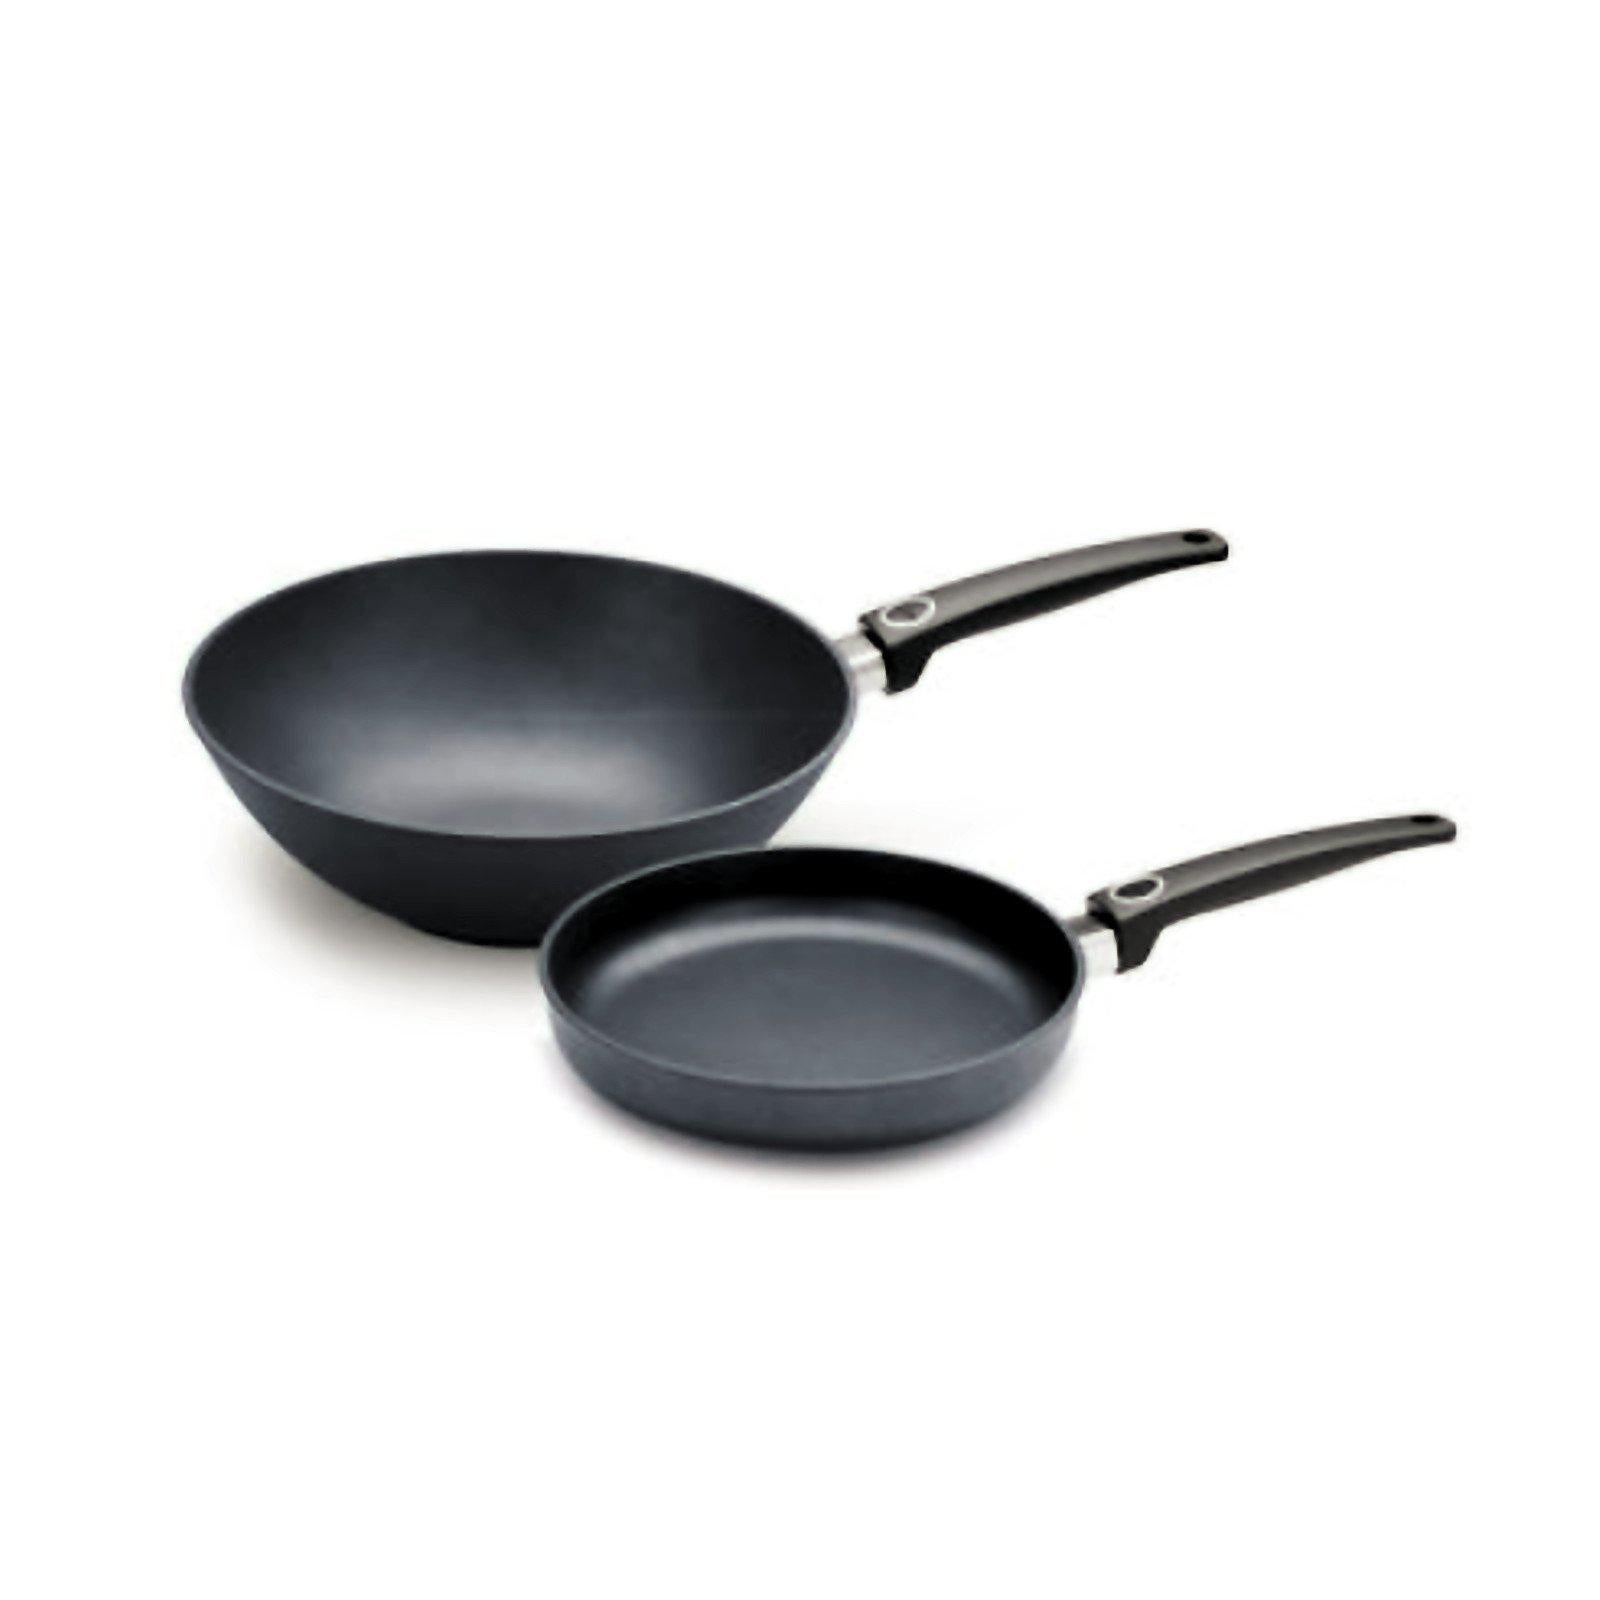 Woll Diamond Lite Induction Fry pan / Wok Set-Frying Pan-Chef's Quality Cookware